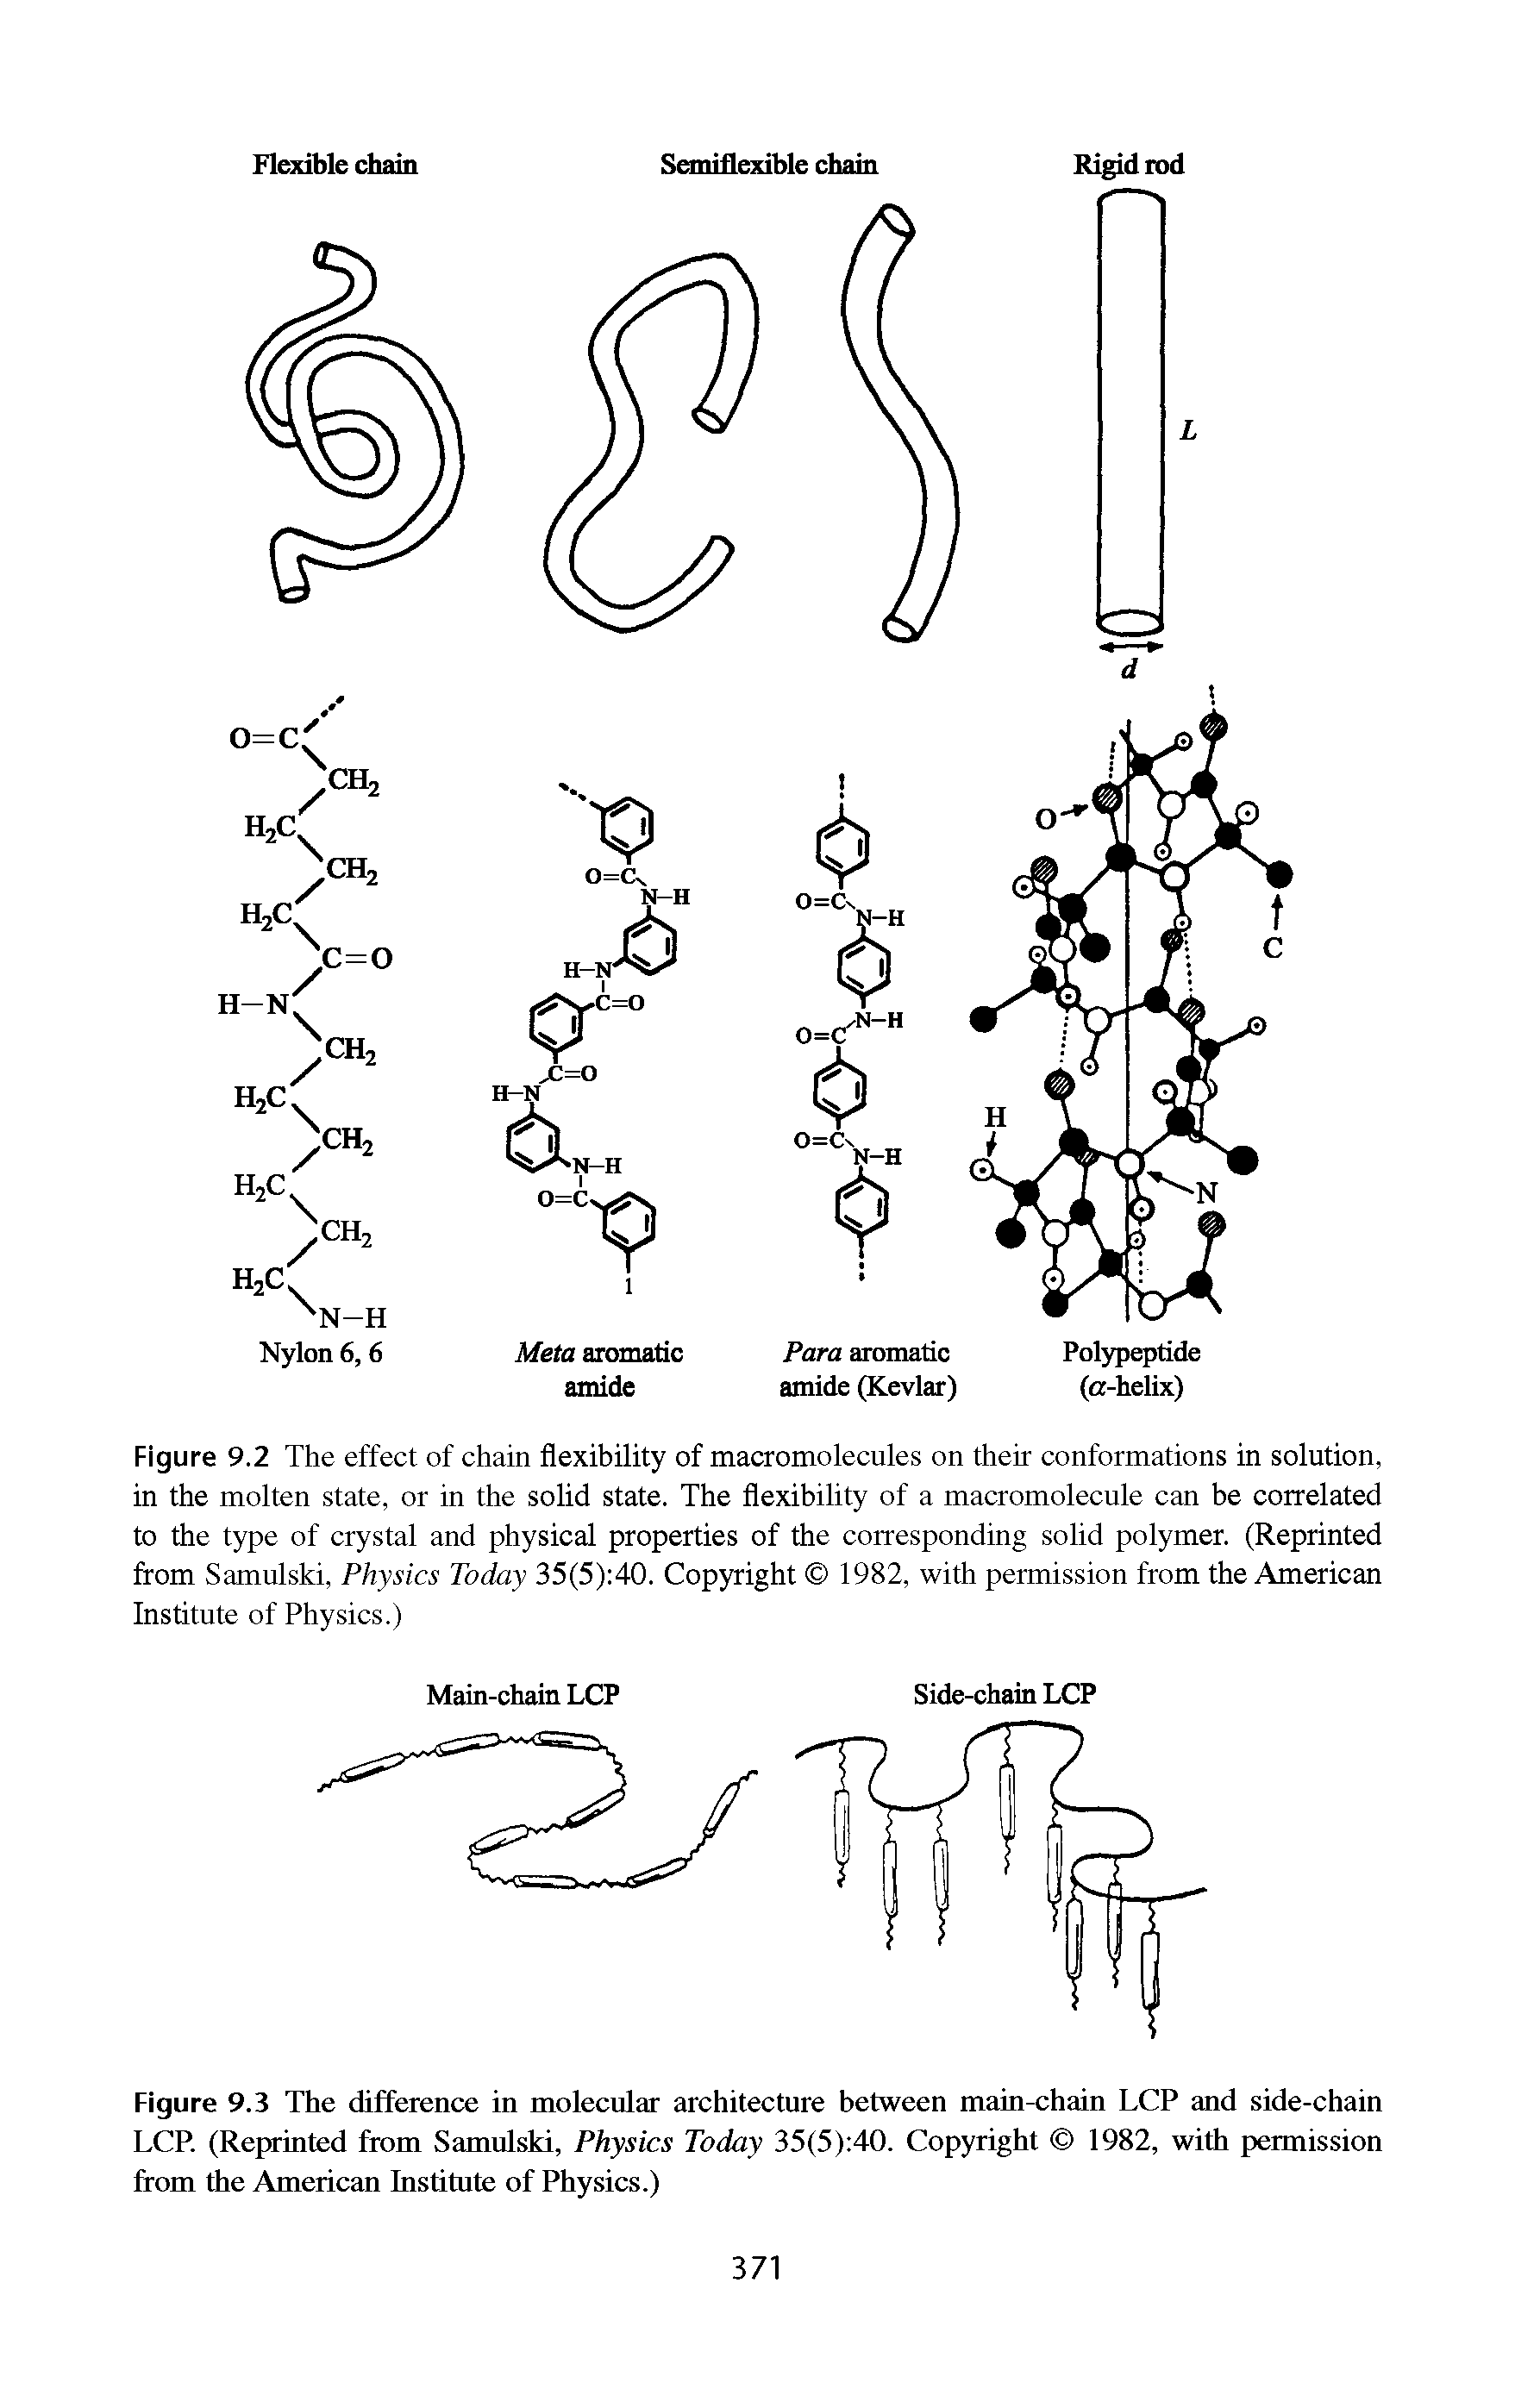 Figure 9.2 The effect of chain flexibility of macromolecules on their conformations in solution, in the molten state, or in the solid state. The flexibility of a macromolecule can be correlated to the type of crystal and physical properties of the corresponding solid polymer. (Reprinted from Samulski, Physics Today 35(5) 40. Copyright 1982, with permission from the American Institute of Physics.)...